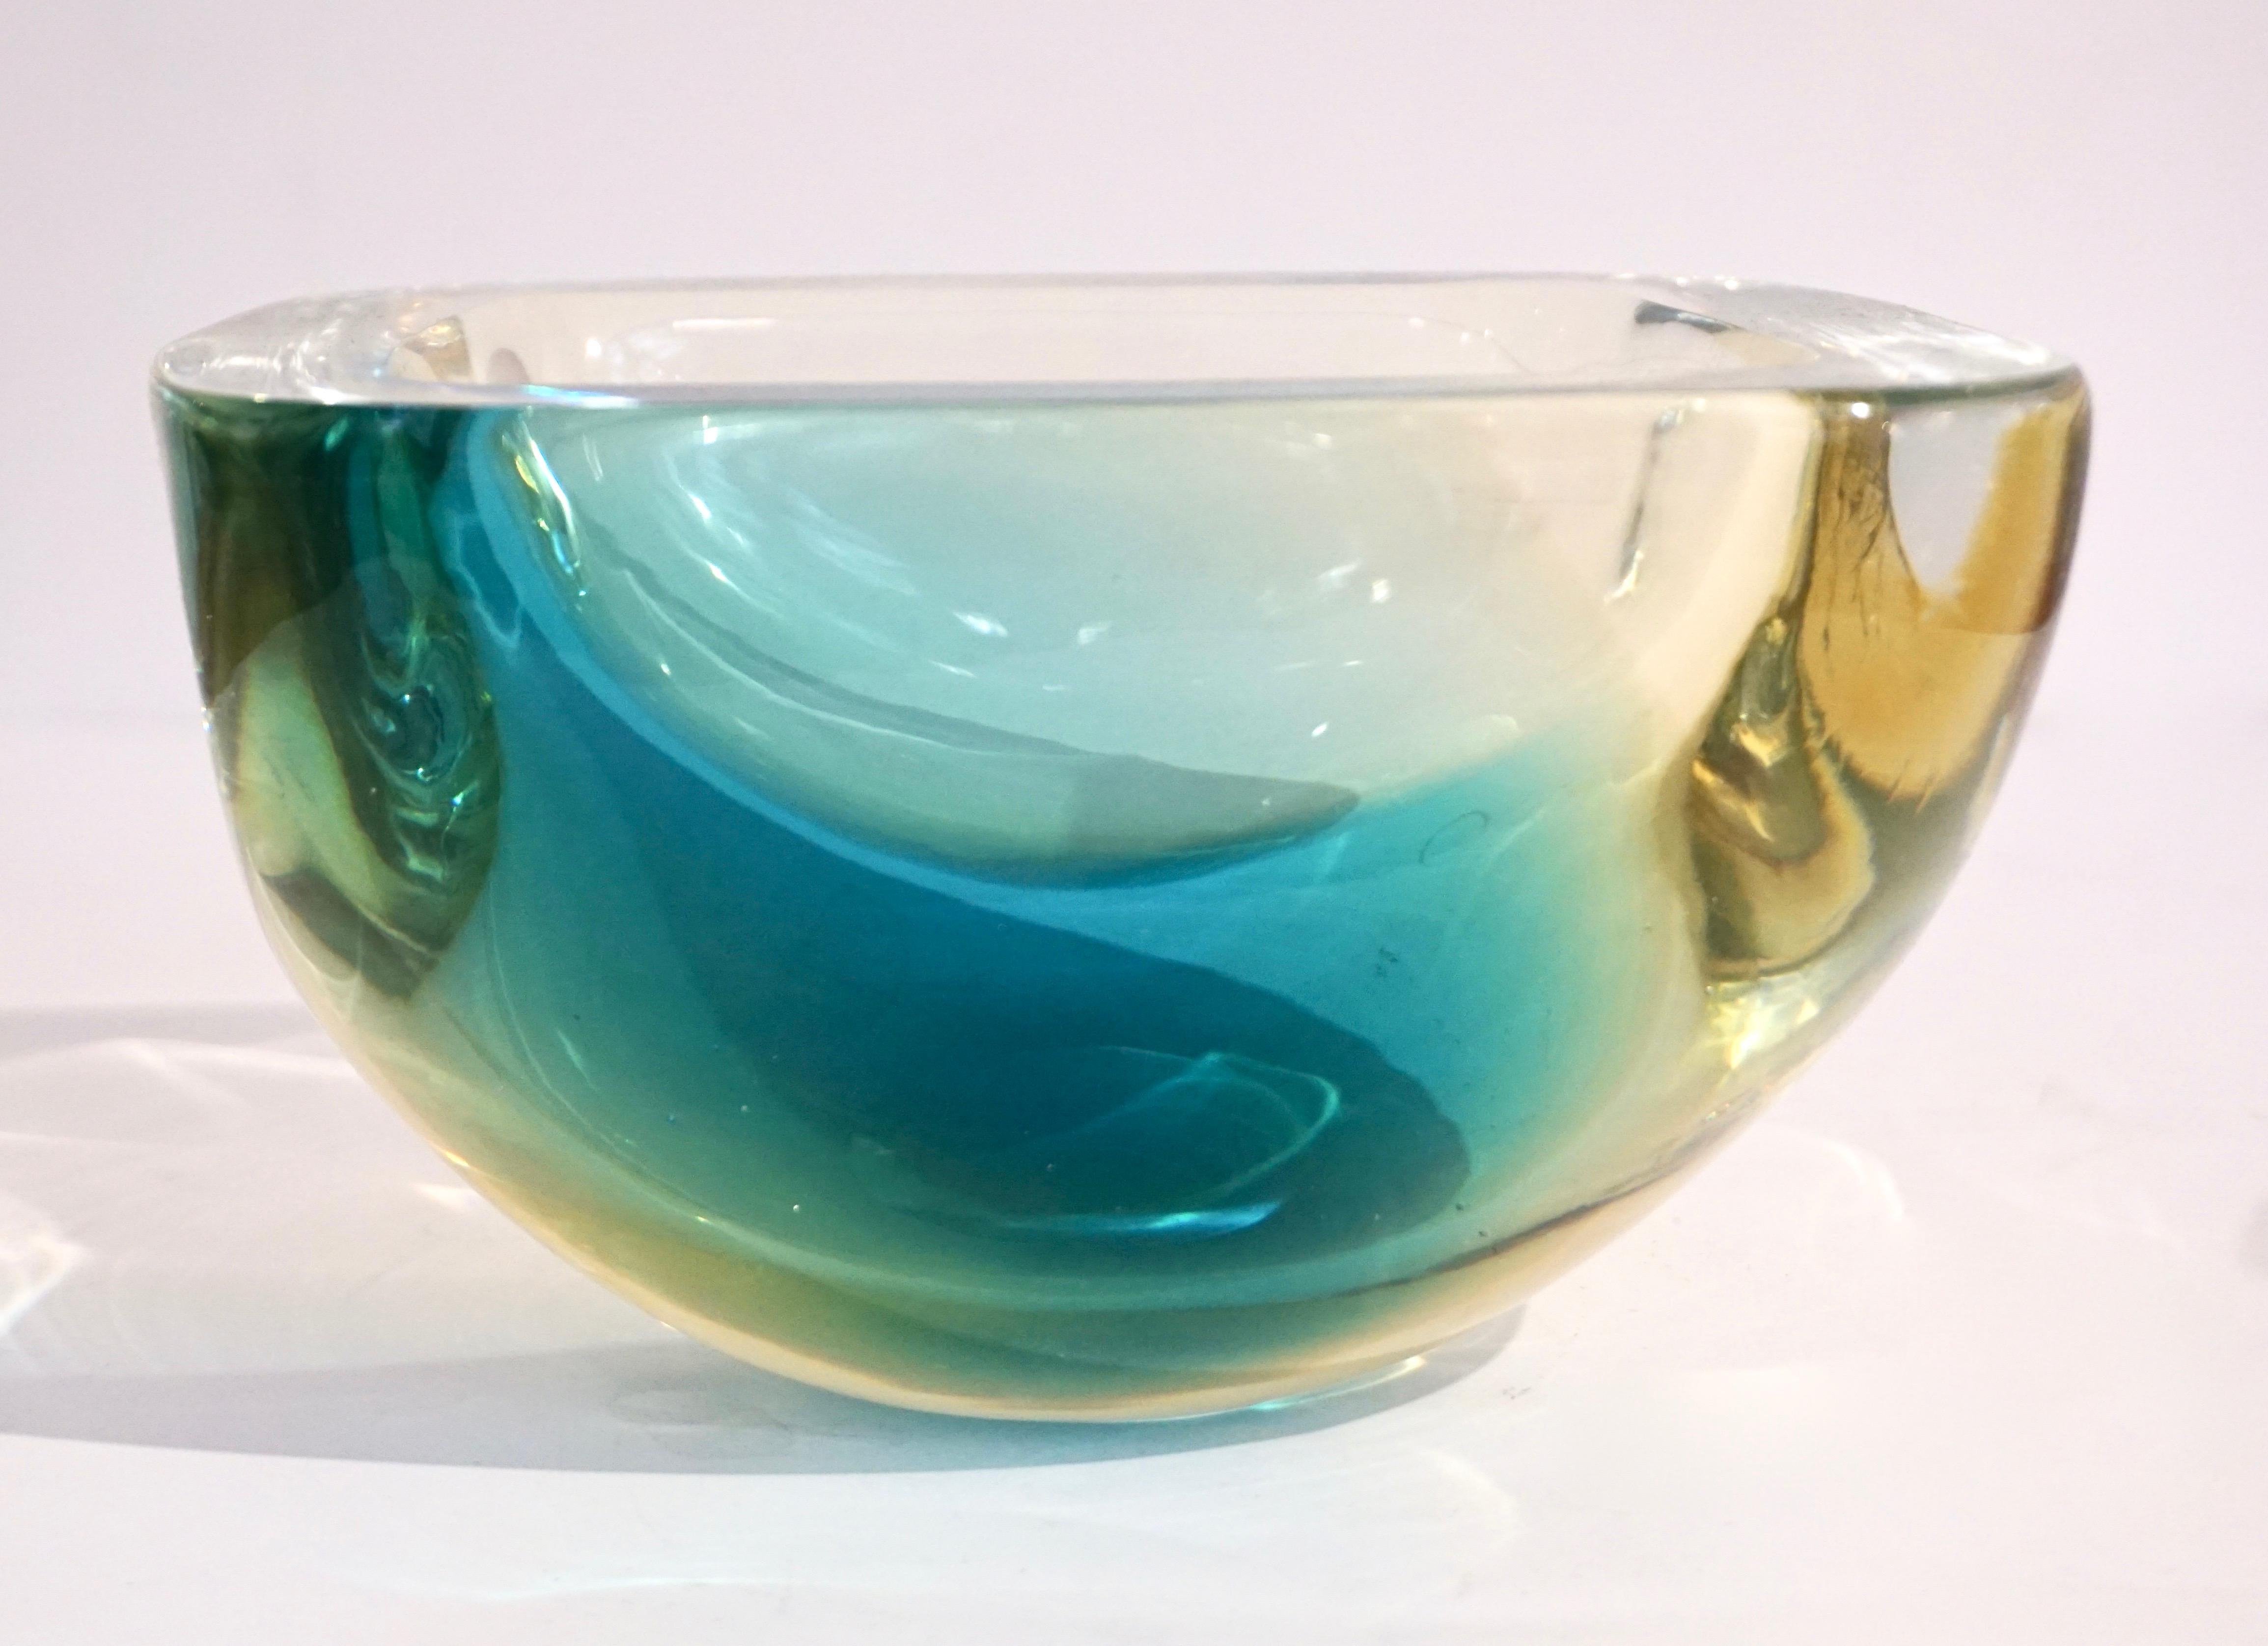 Vintage organic modern 1970s blown Murano glass square bowl or catchall dish in yellow amber and aqua green, signed by Venini, elegantly decorated in patch colors that catch the light and enhance the shape with flat cut polished top. Also, available